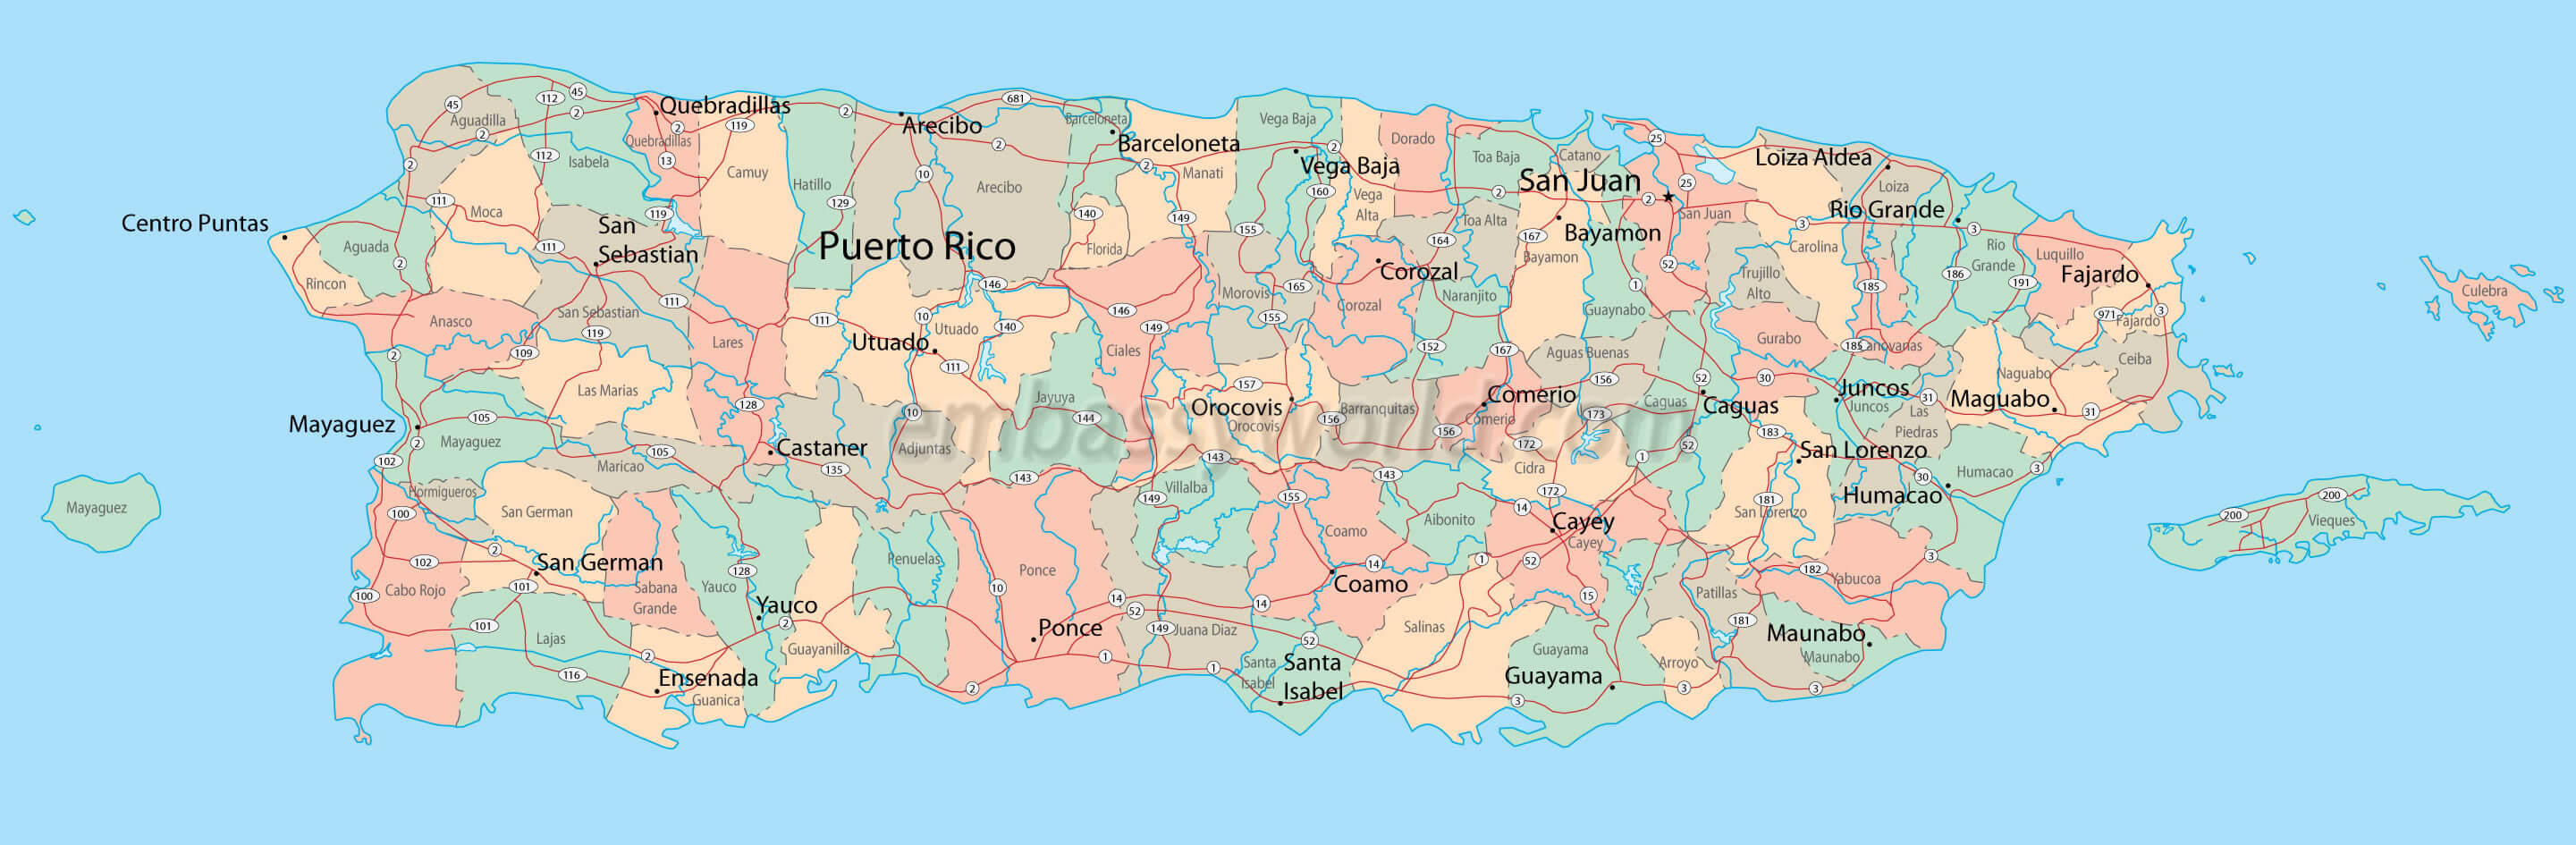 cities map of puerto rico